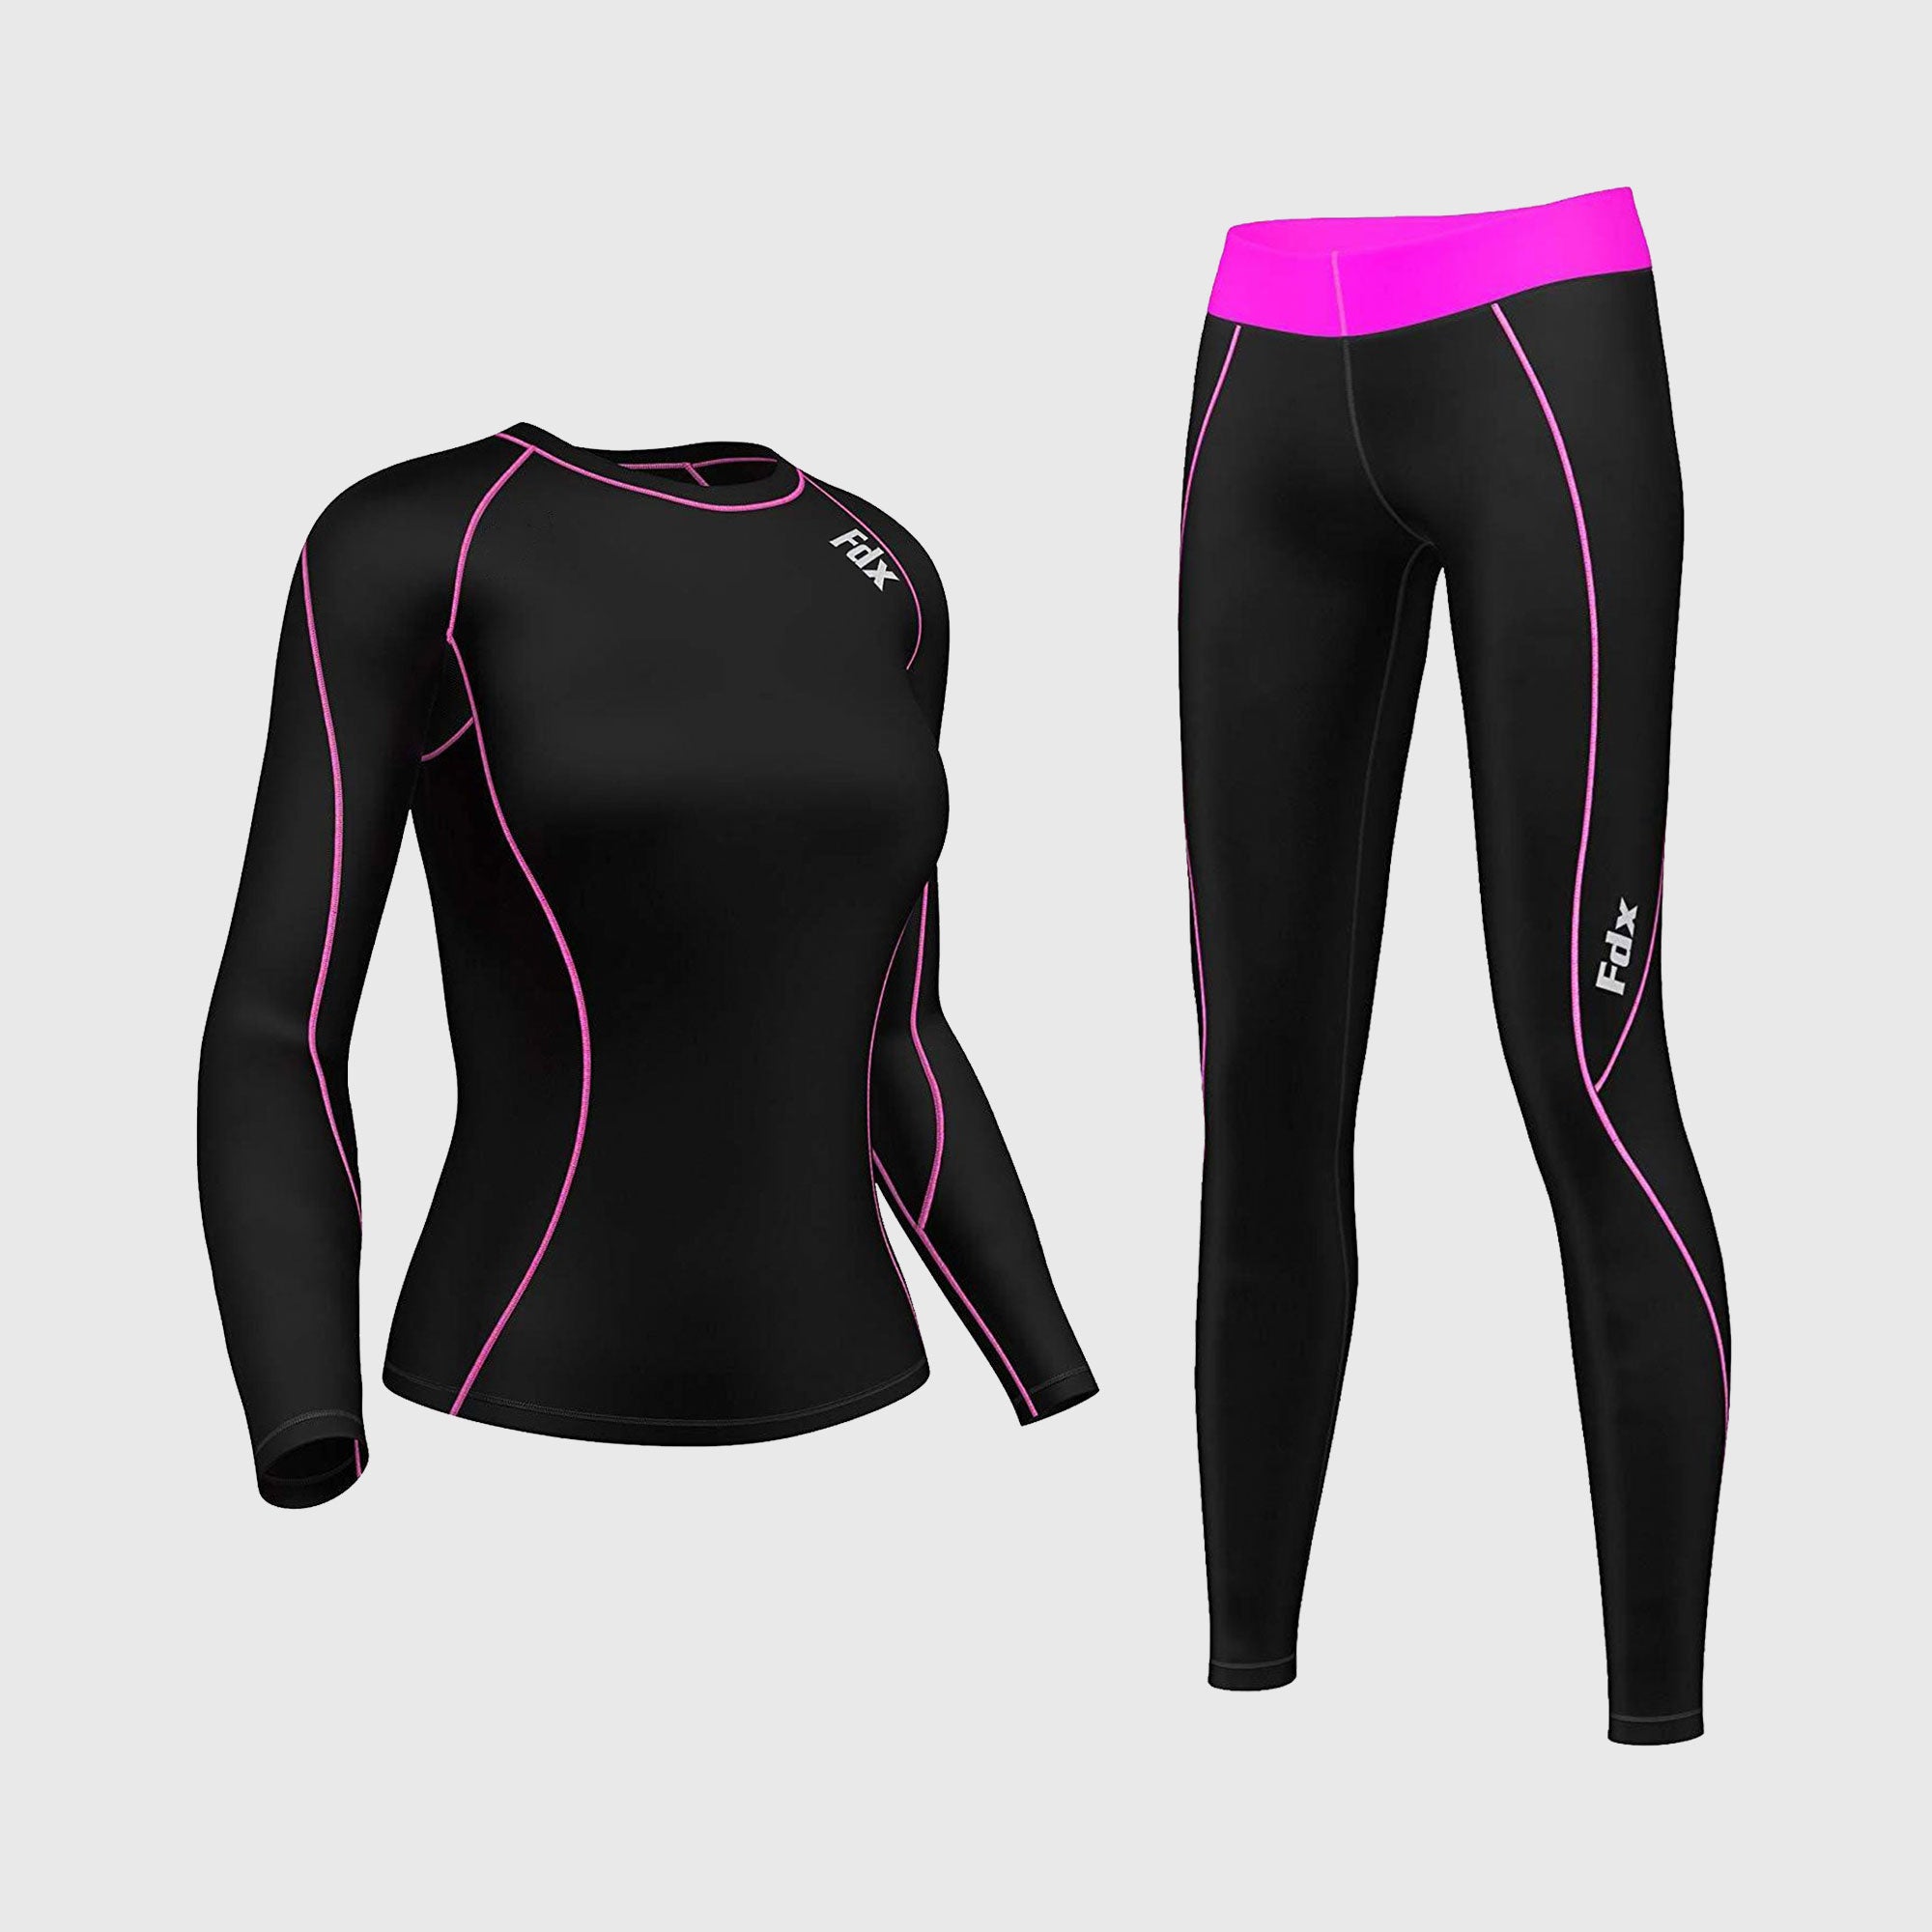 Womens Compression Clothing - Tops & Leggings